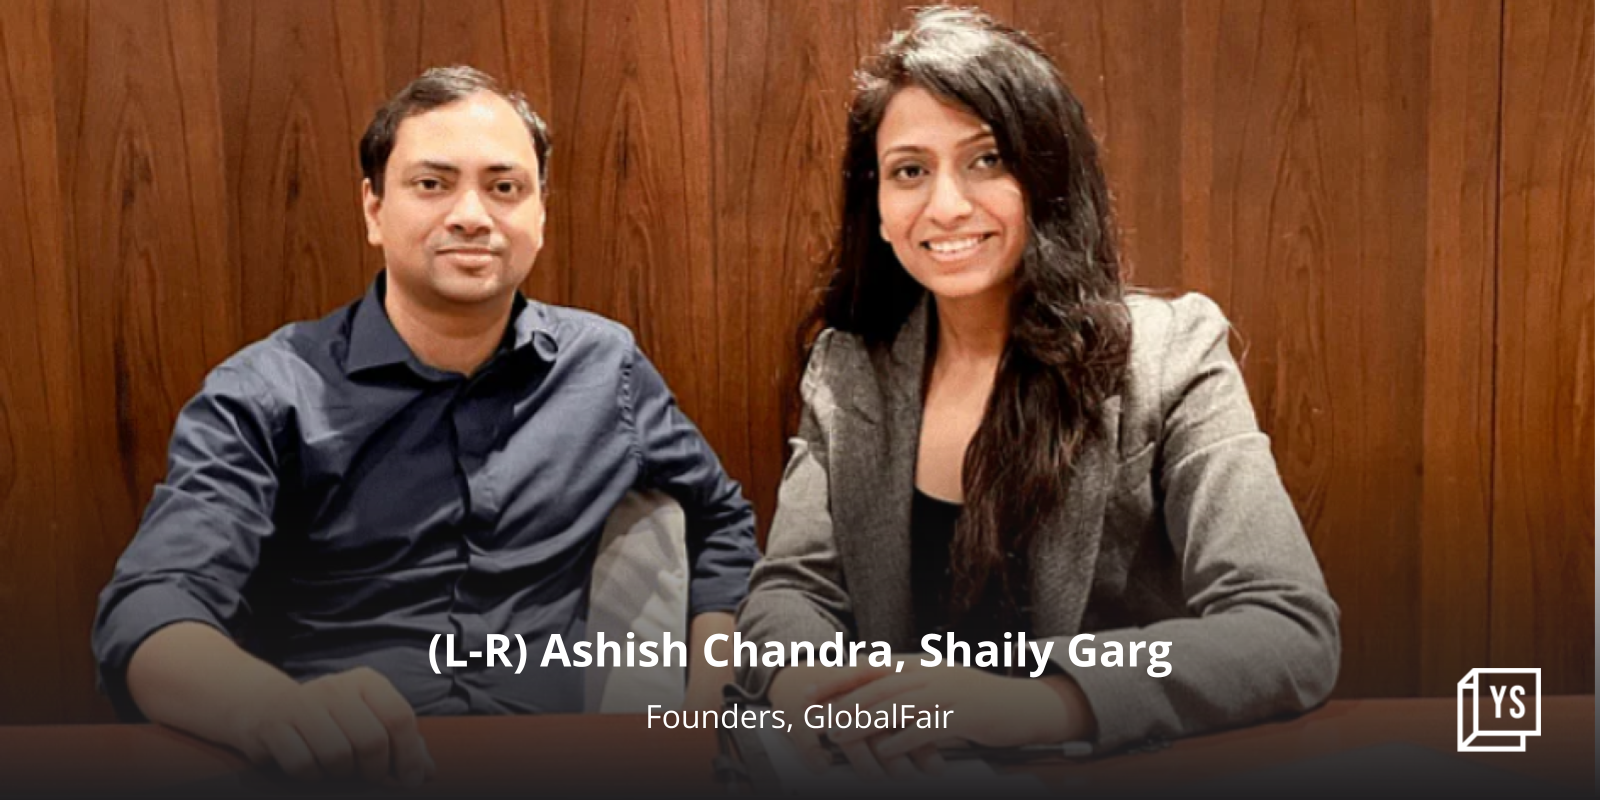 GlobalFair raises $20M in Series A round led by Lightspeed